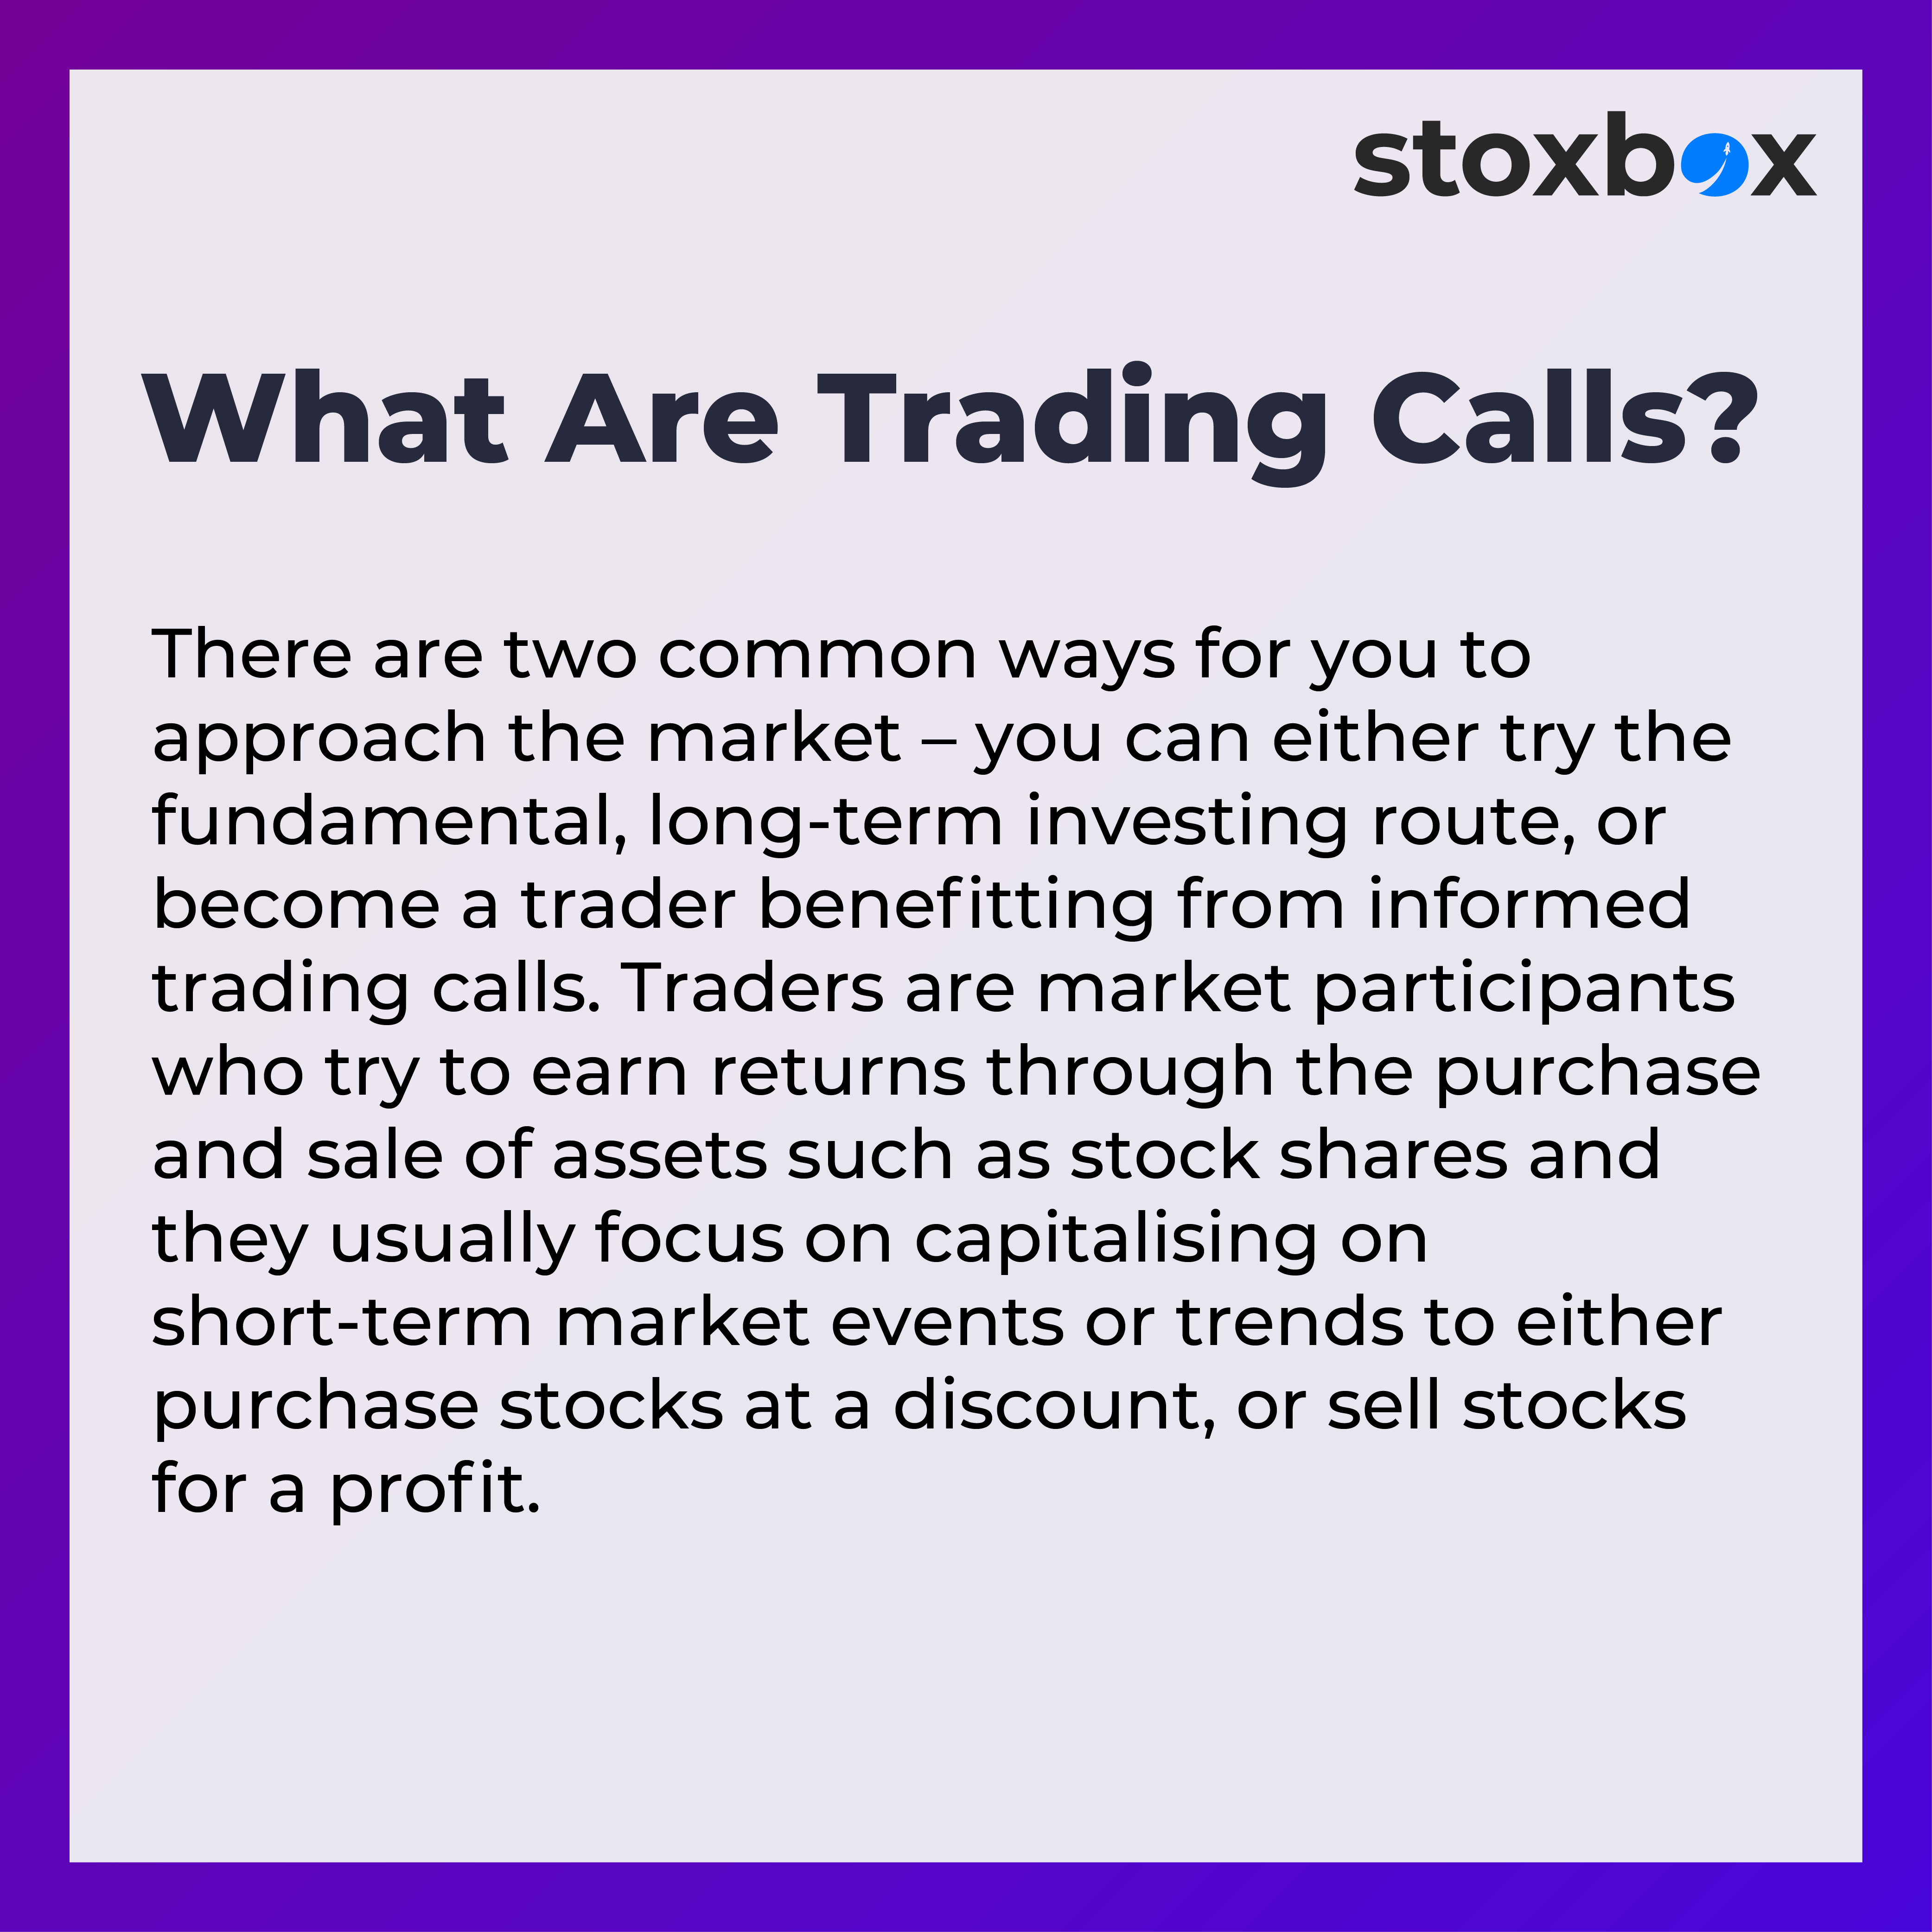 What Are Trading Calls and How Do They Work